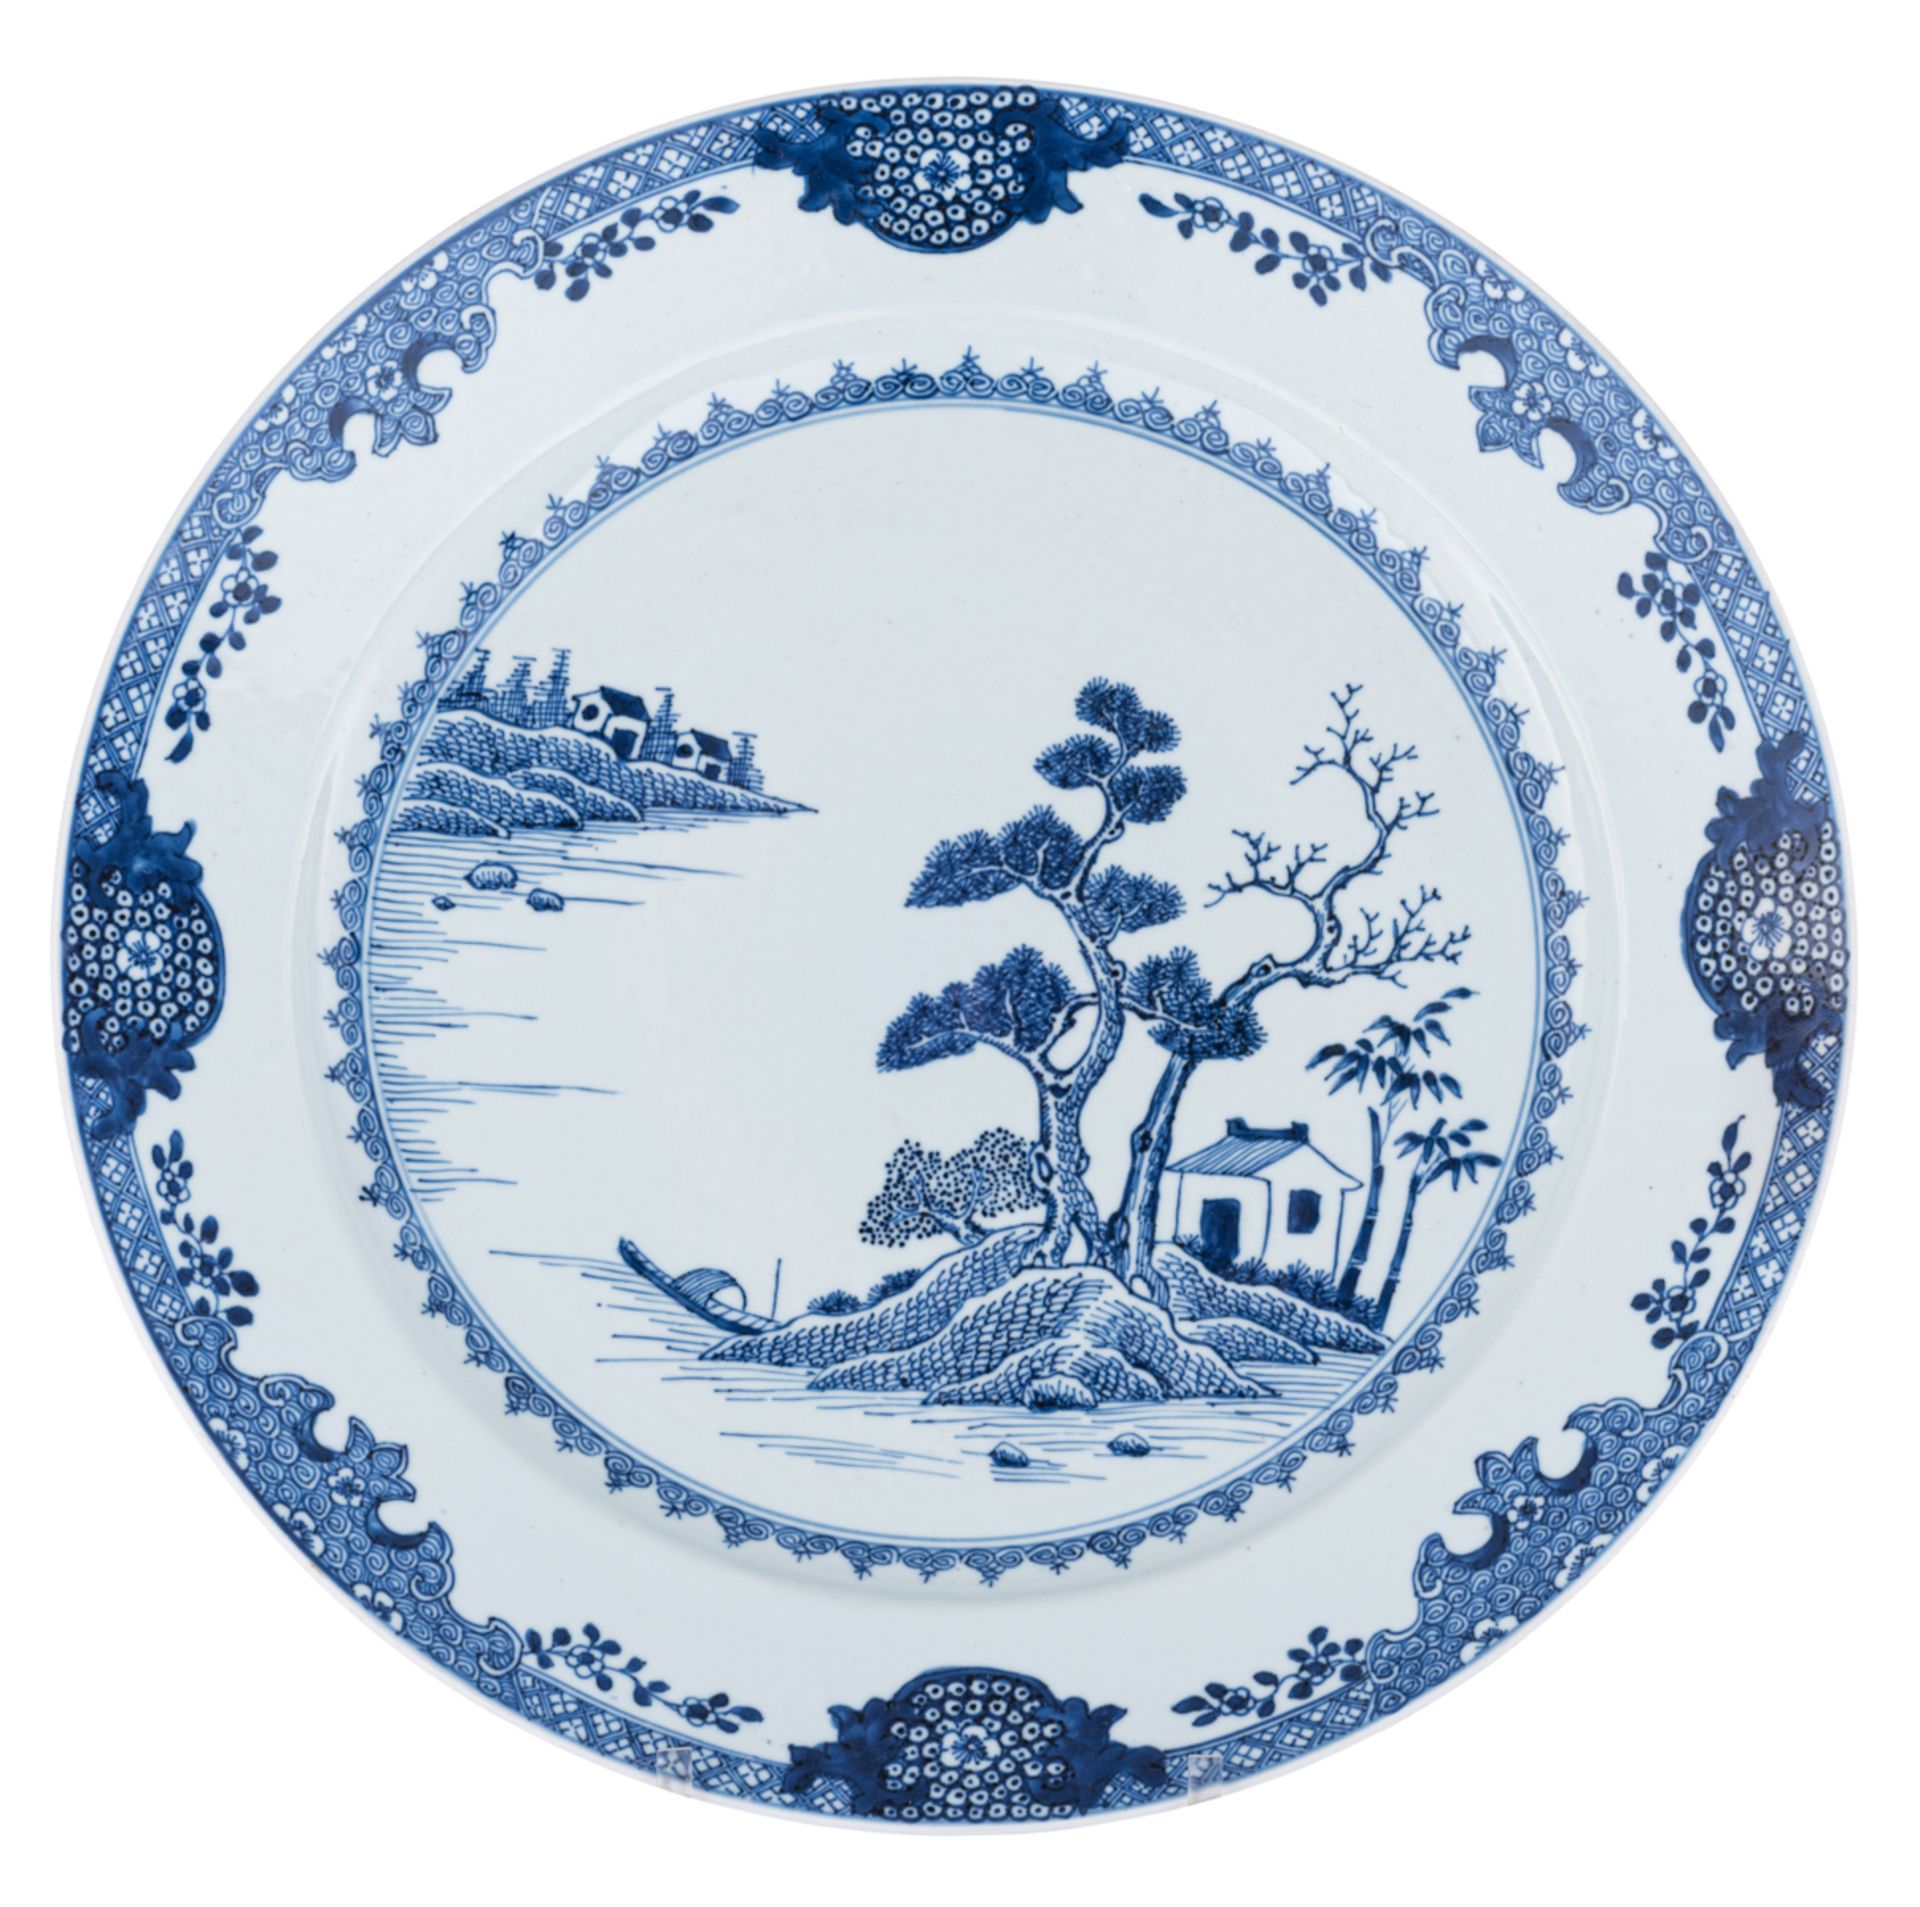 A Chinese blue and white export porcelain plate, decorated with a pavilion in a river landscape, 18t